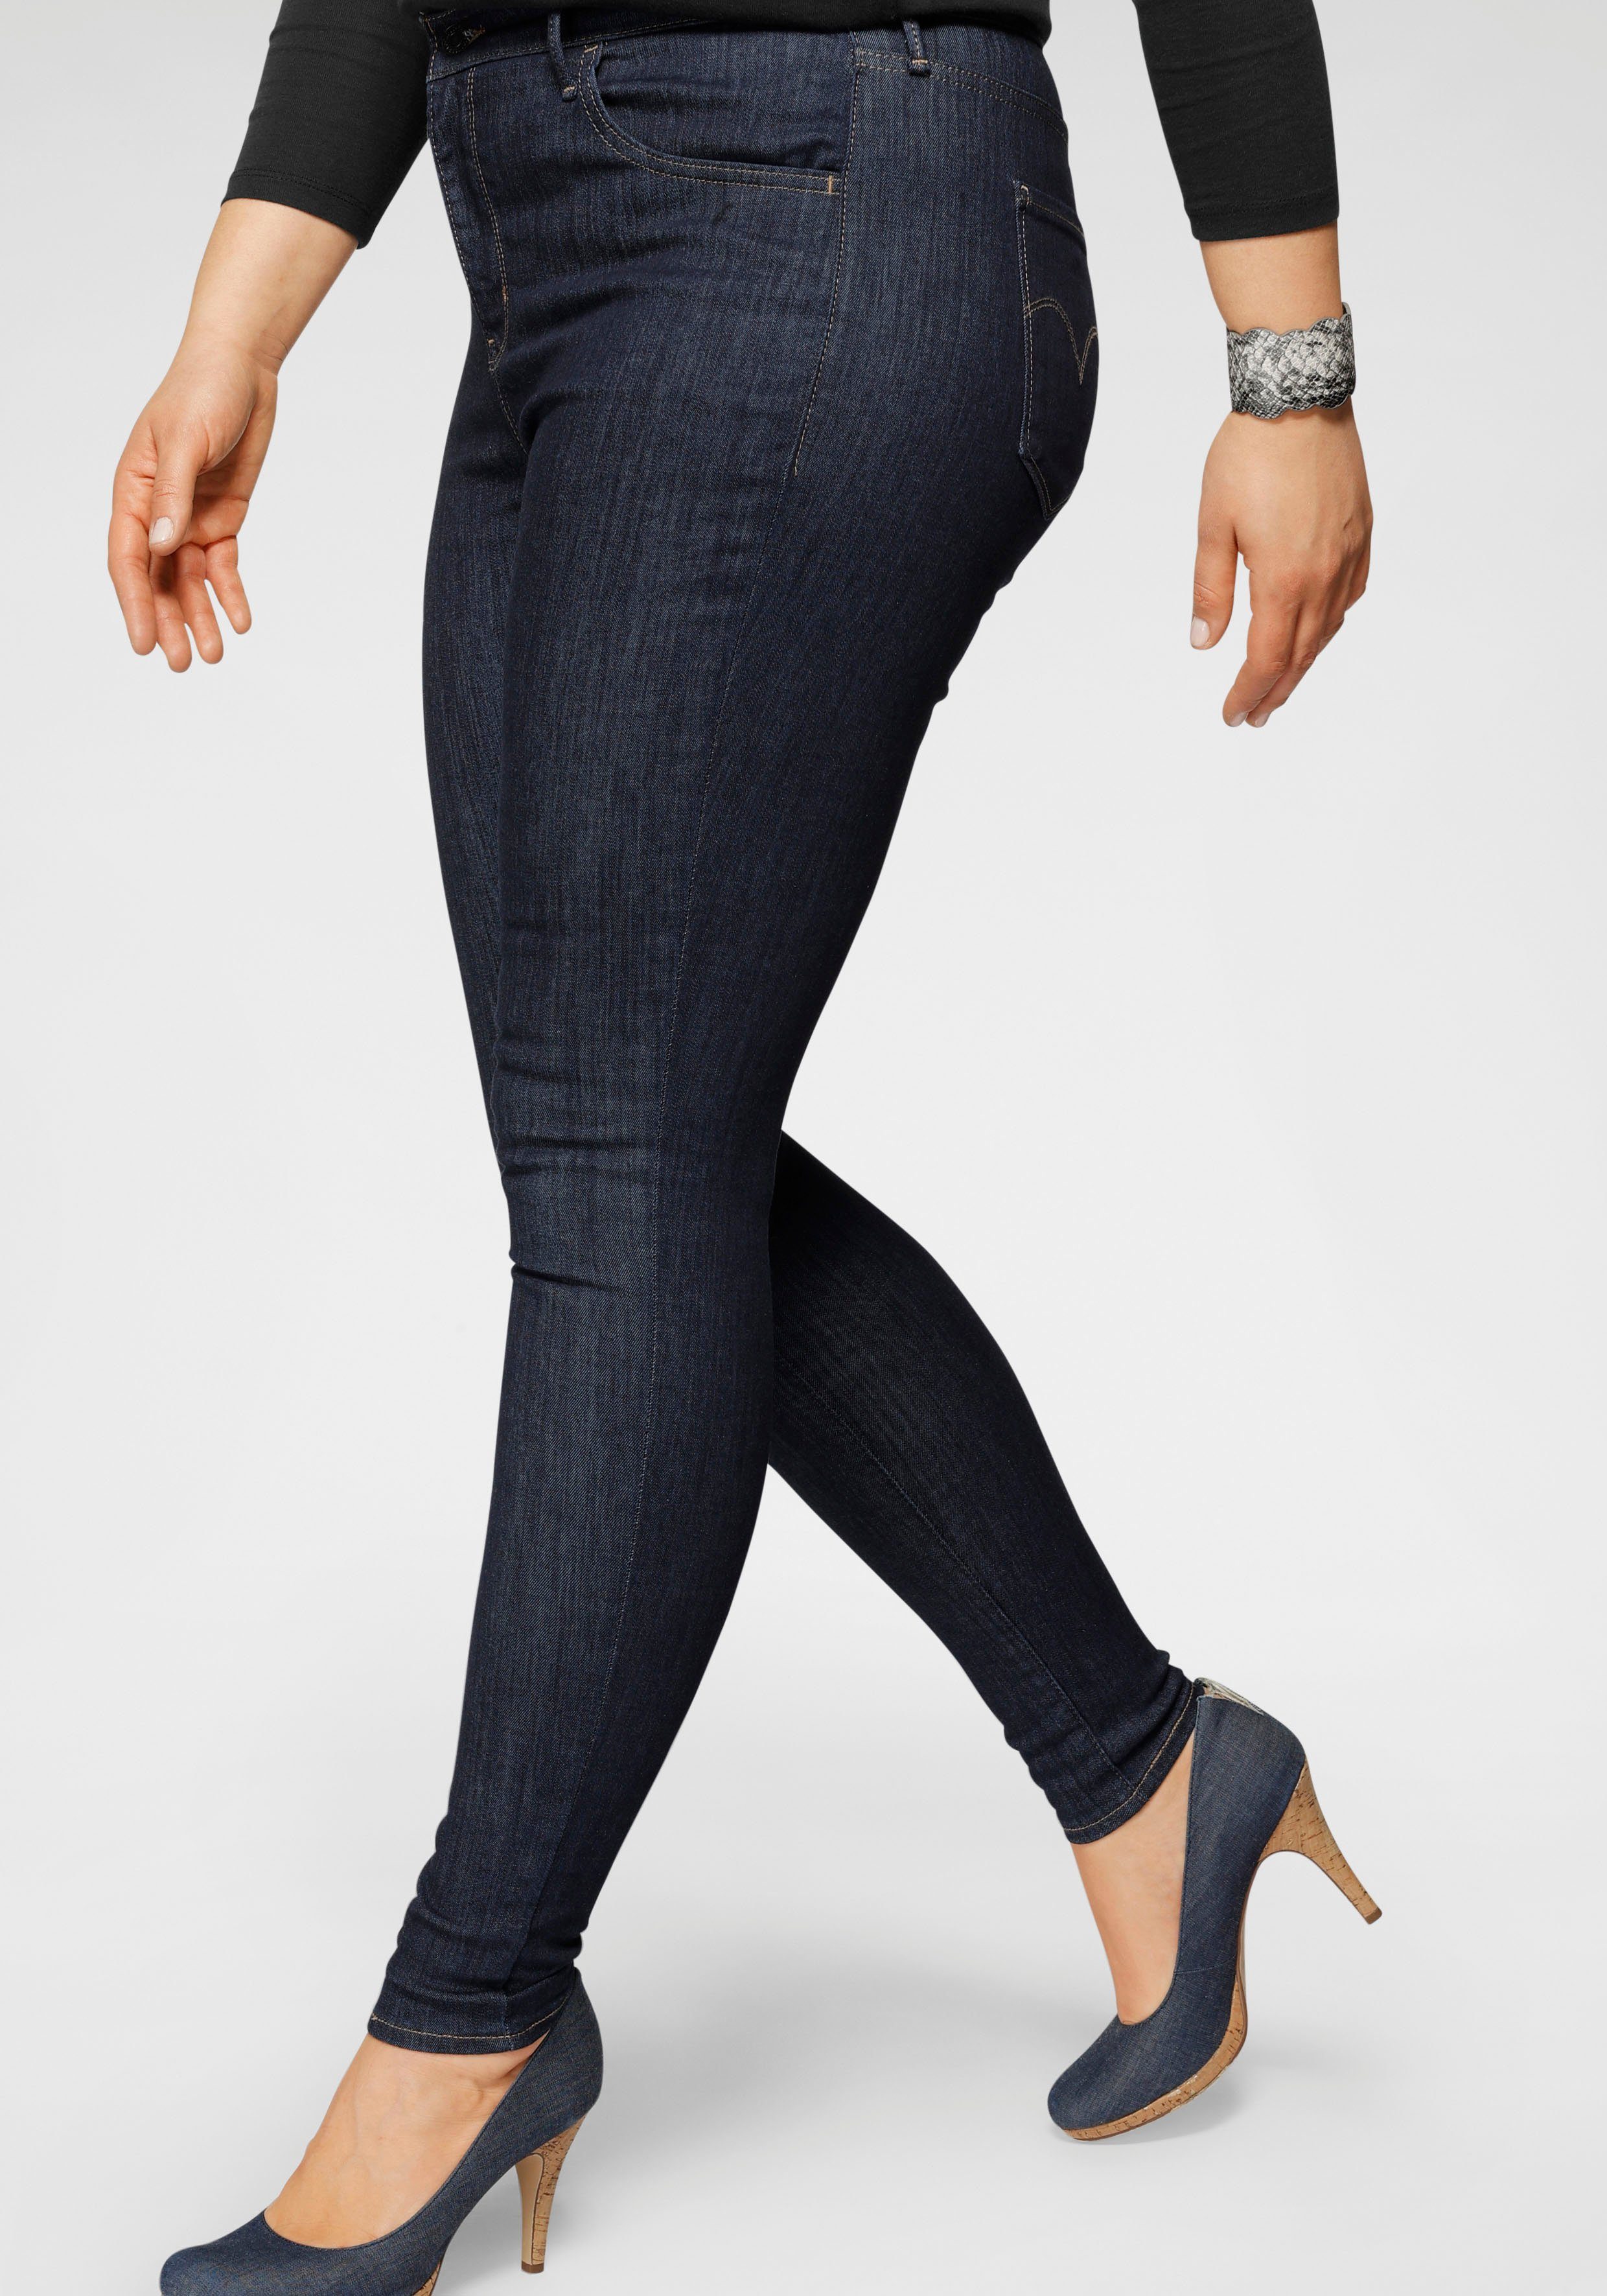 Levi's® Plus Skinny-fit-Jeans 720 hoher mit High-Rise rinsed Leibhöhe